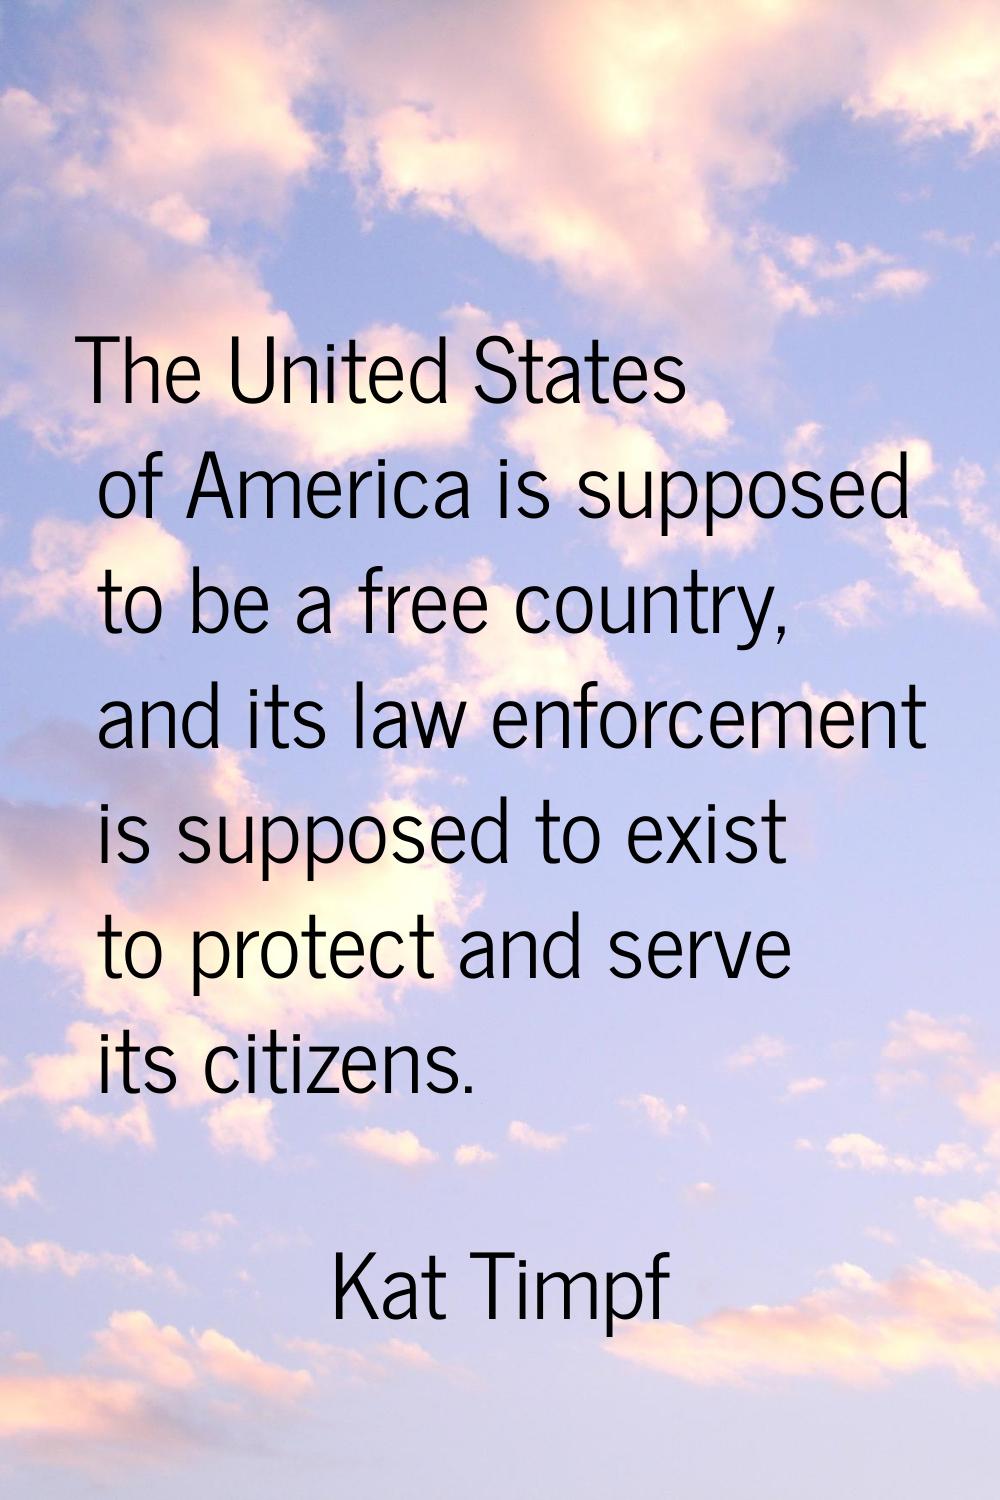 The United States of America is supposed to be a free country, and its law enforcement is supposed 